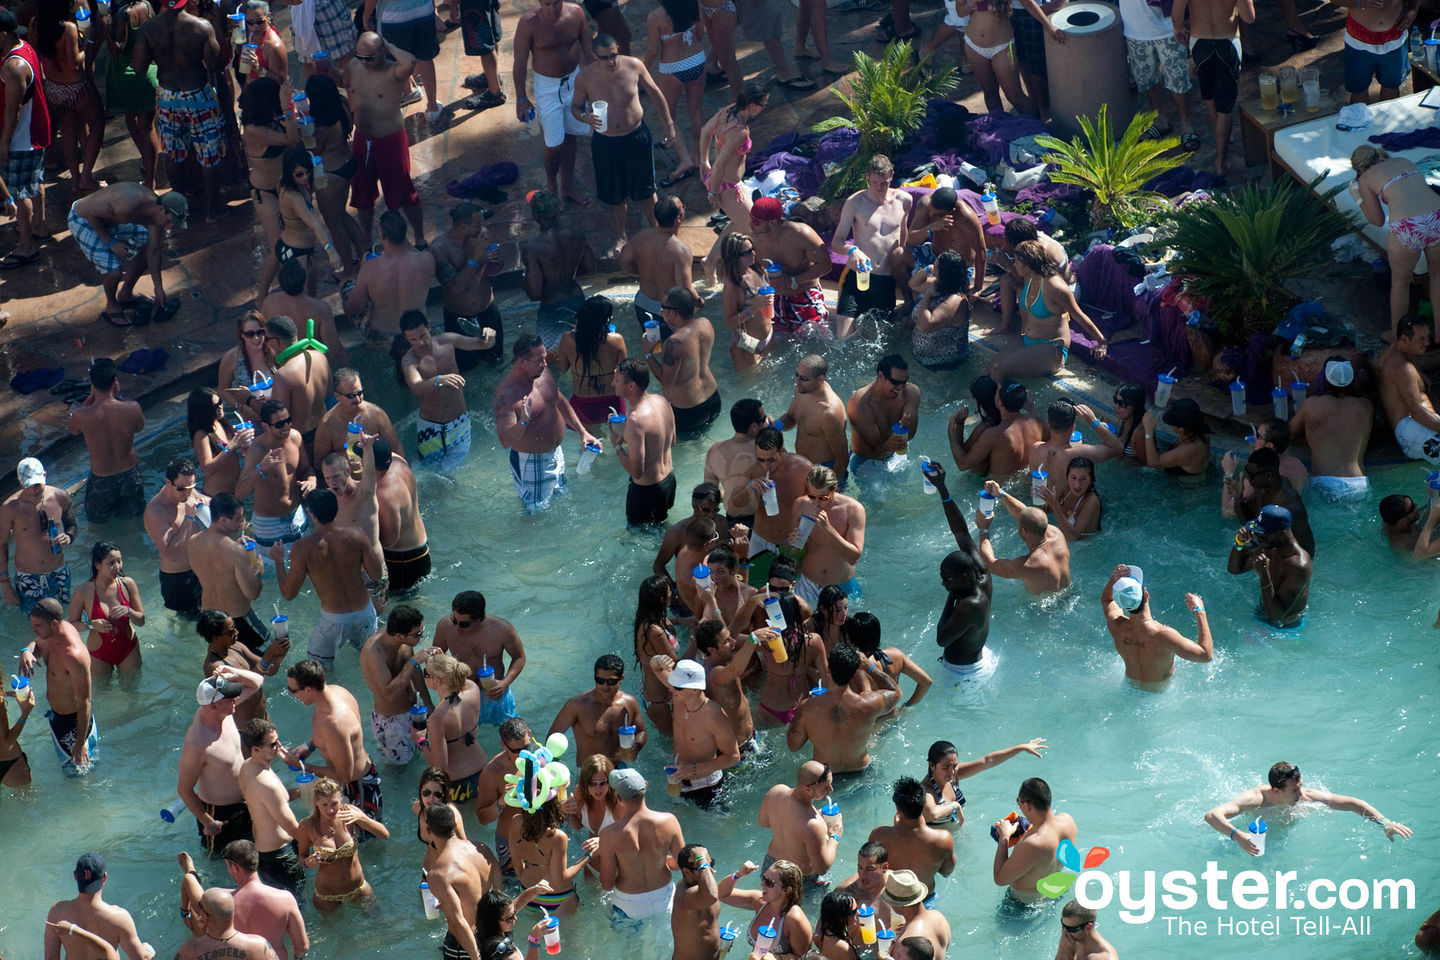 Are Vegas Pool Parties Worth It? - Wandering Why Traveler